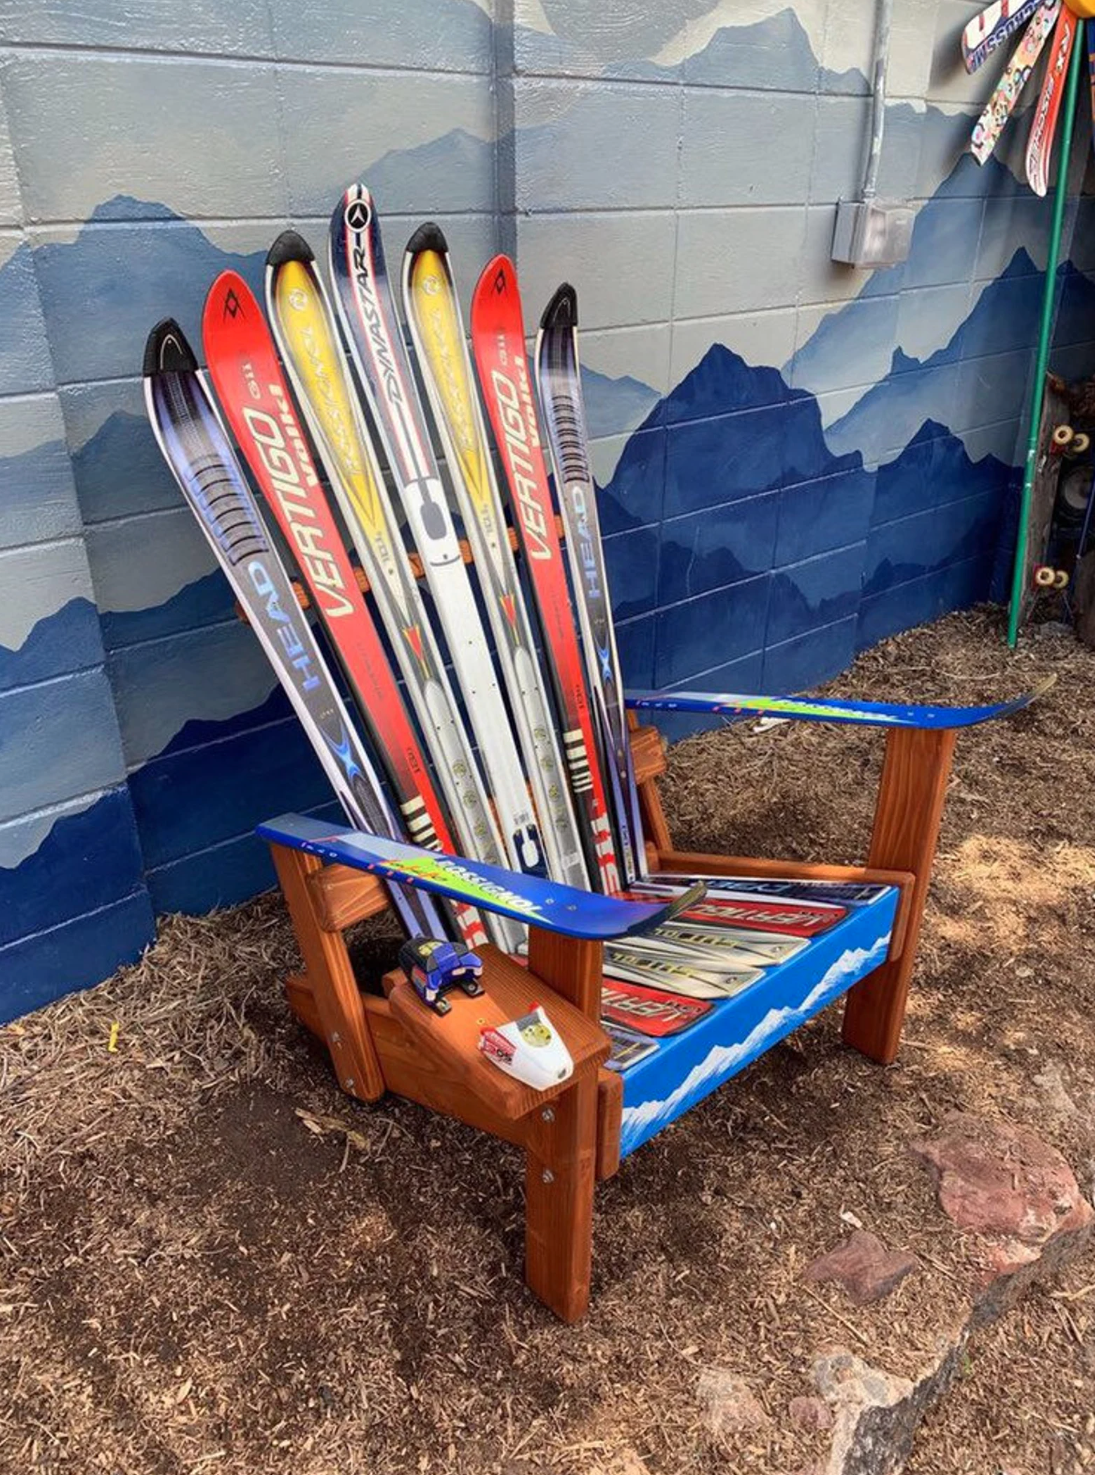 An adirondack-style chair made from upcycled skis